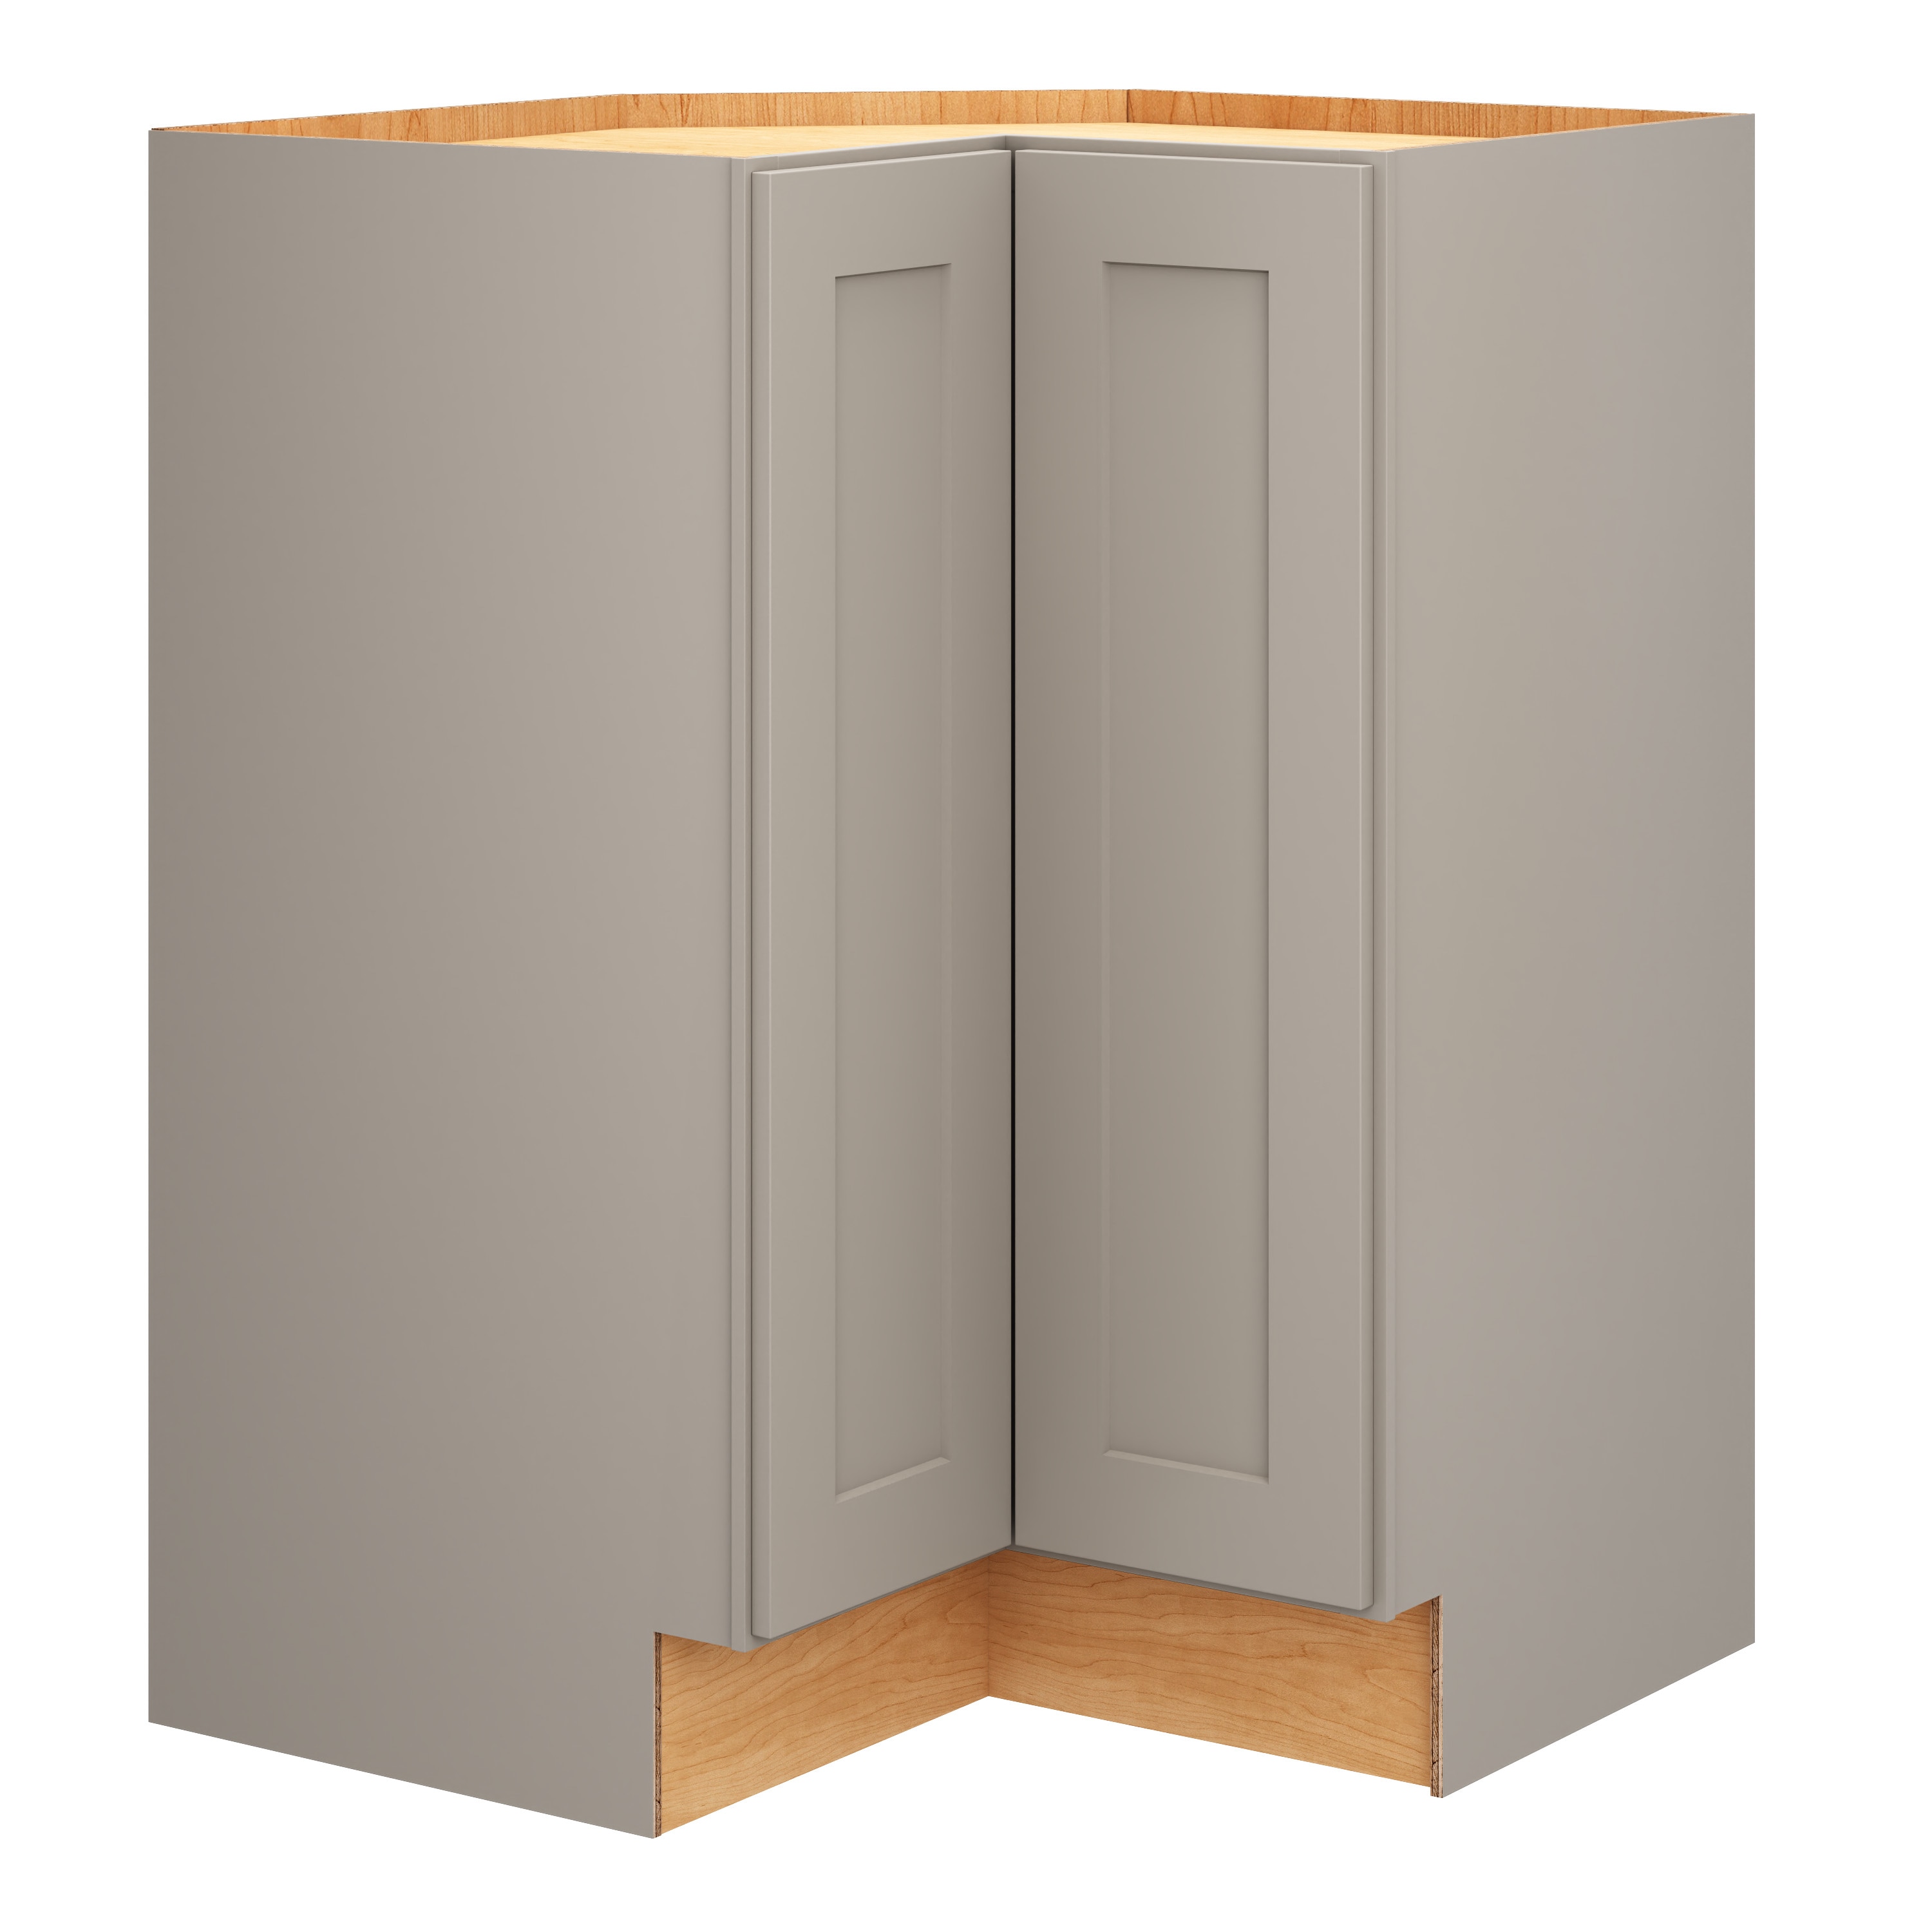 Diamond at Lowes - Base Easy Reach Cabinet with Adjustable Shelves